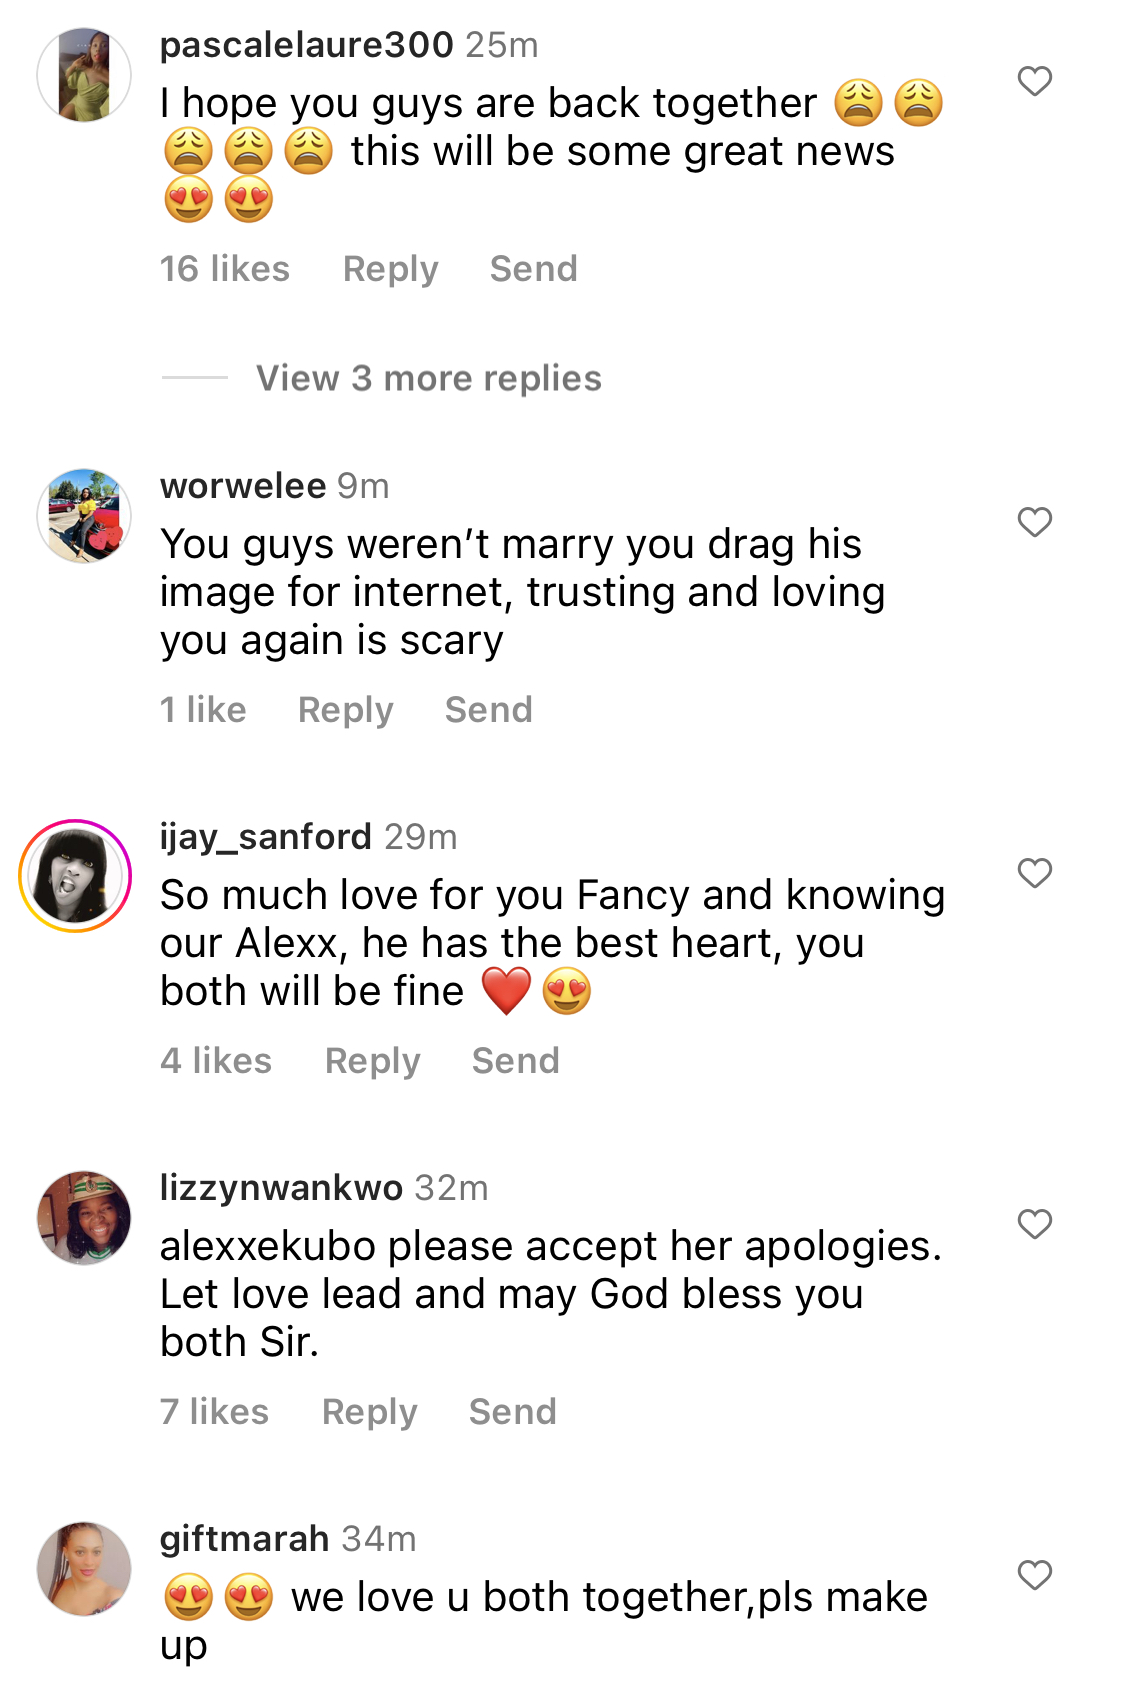 I’m sorry for all the hurt and pain, I miss you - Fancy Acholonu Ex-fiancée to actor Alex Ekubo begs